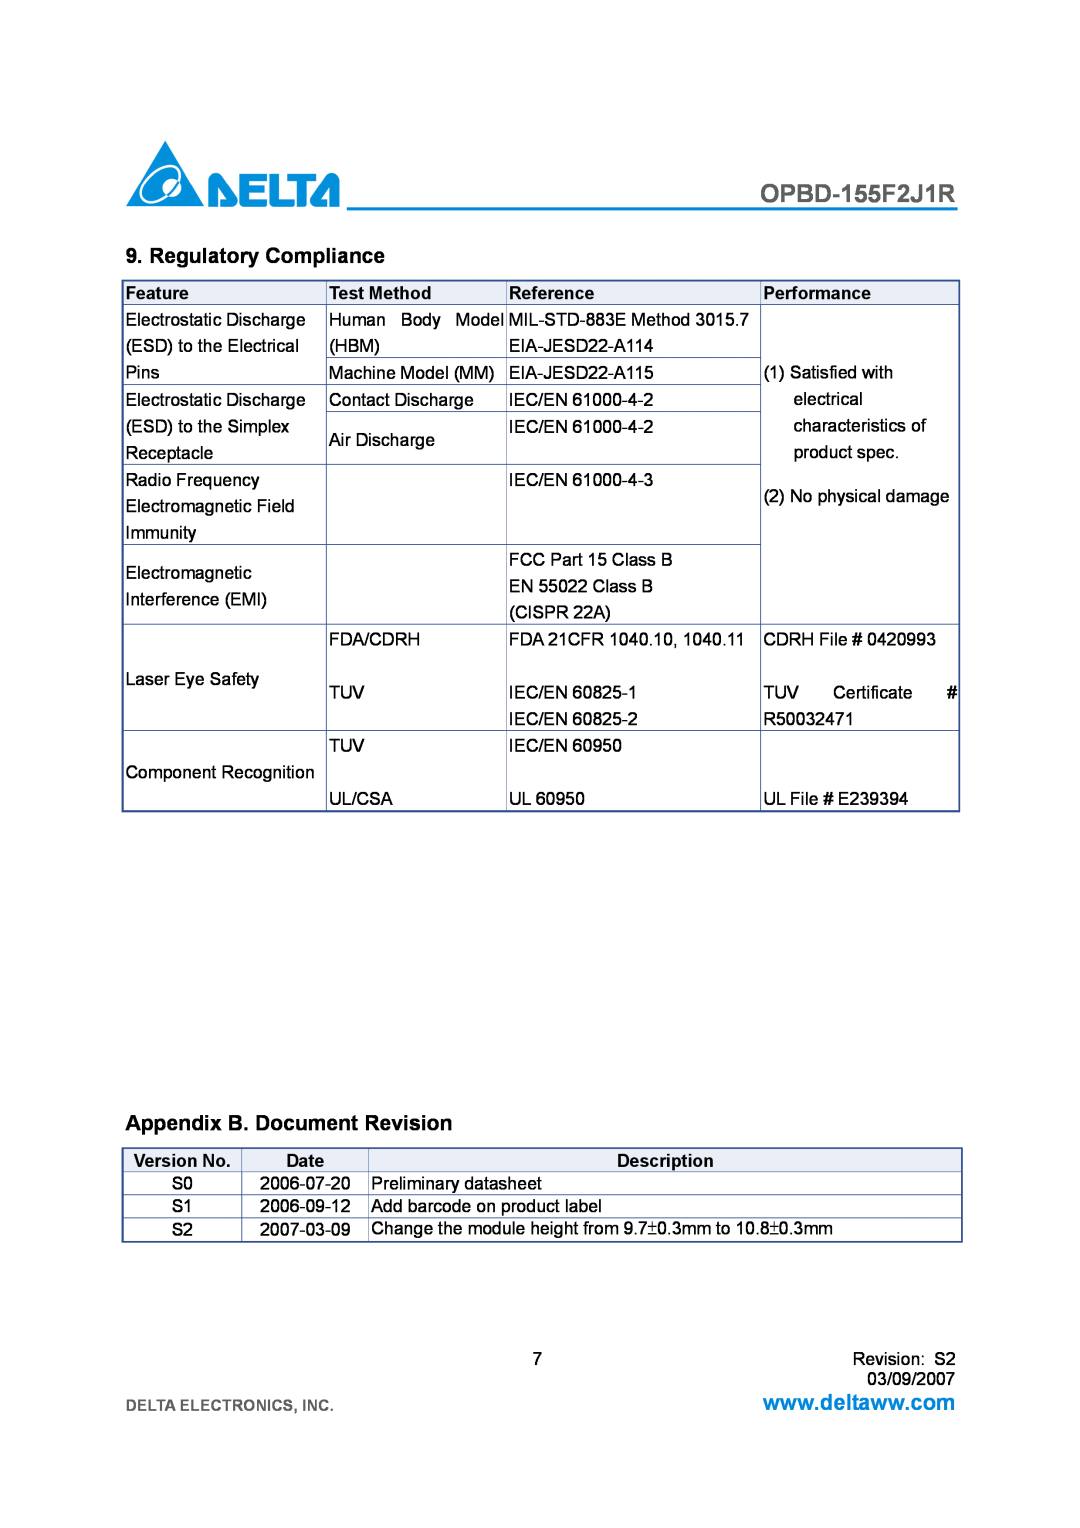 Delta Electronics OPBD-155F2J1R Regulatory Compliance, Appendix B. Document Revision, Feature, Test Method, Reference 